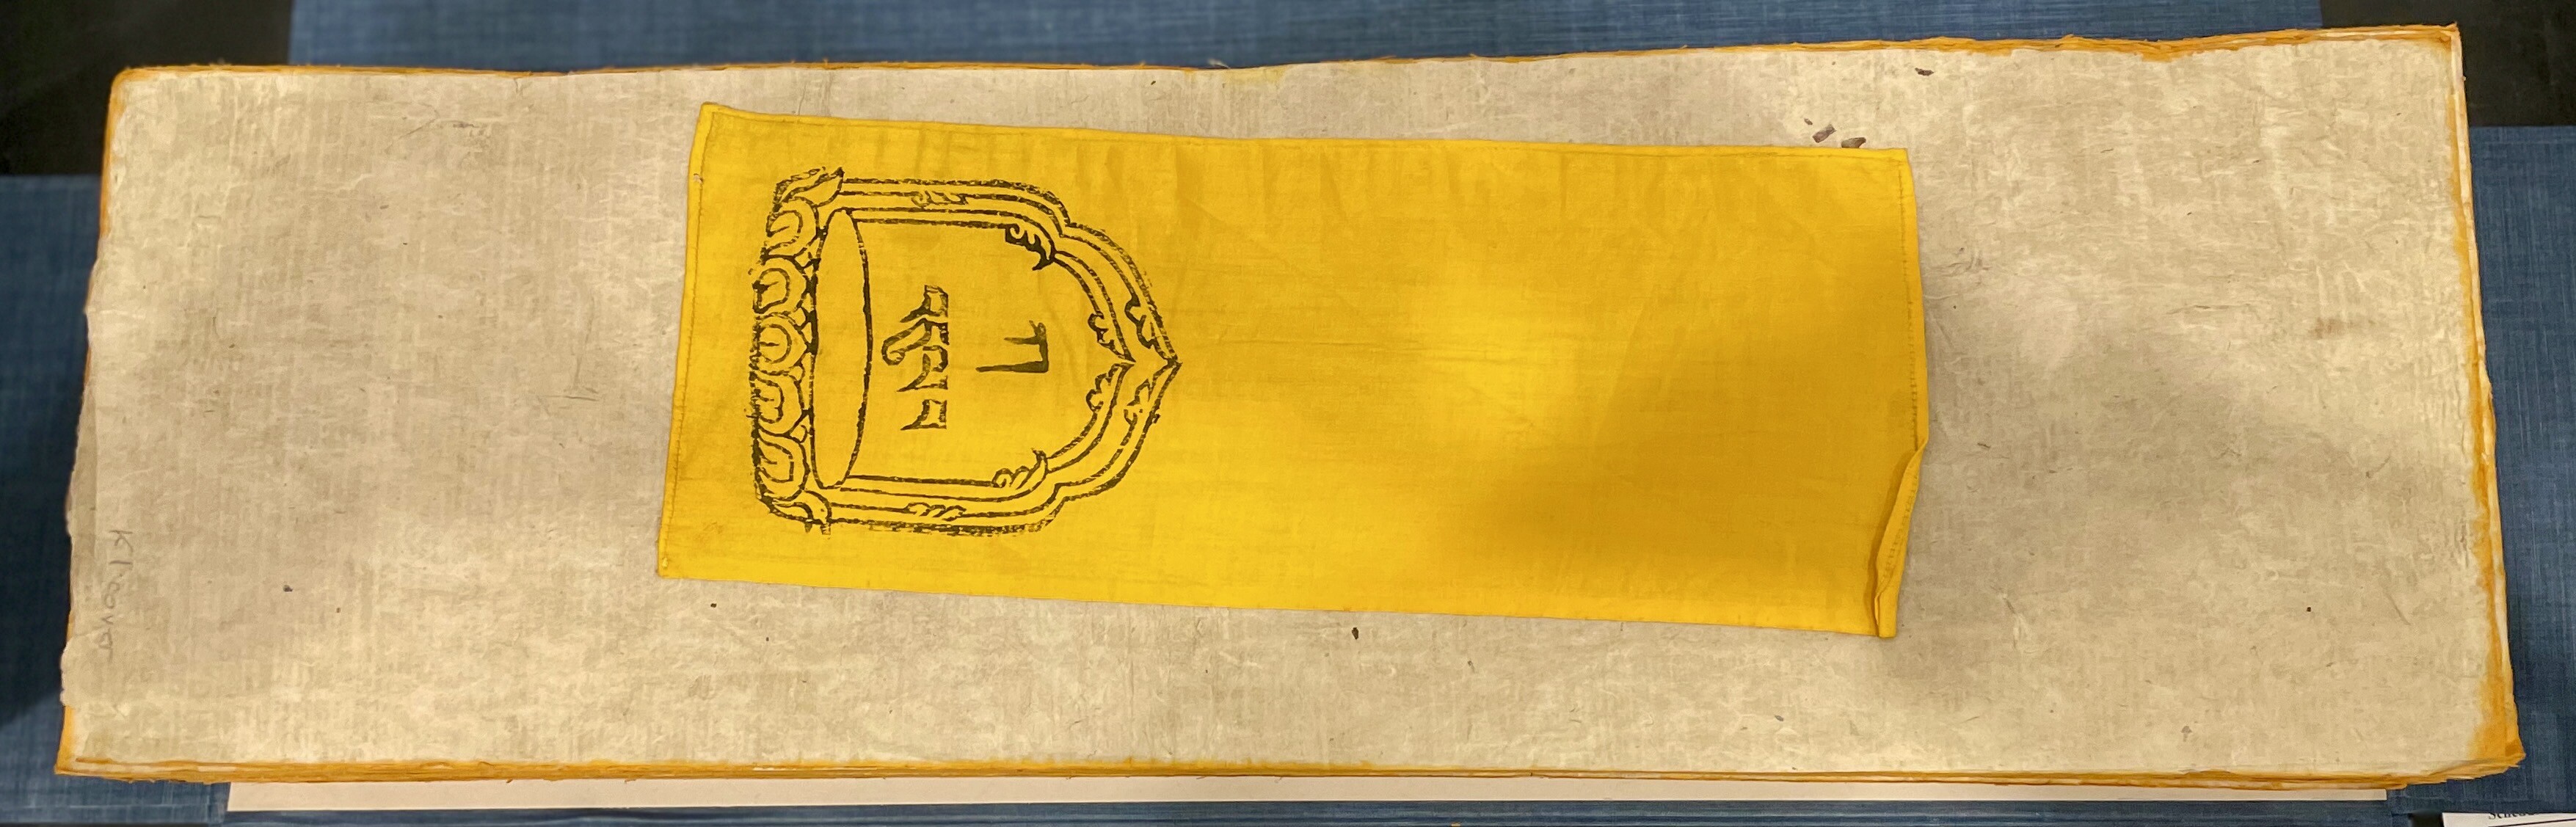 The cover of the Tibetan Kanjur with black text in a cartouche printed on yellow fabric..